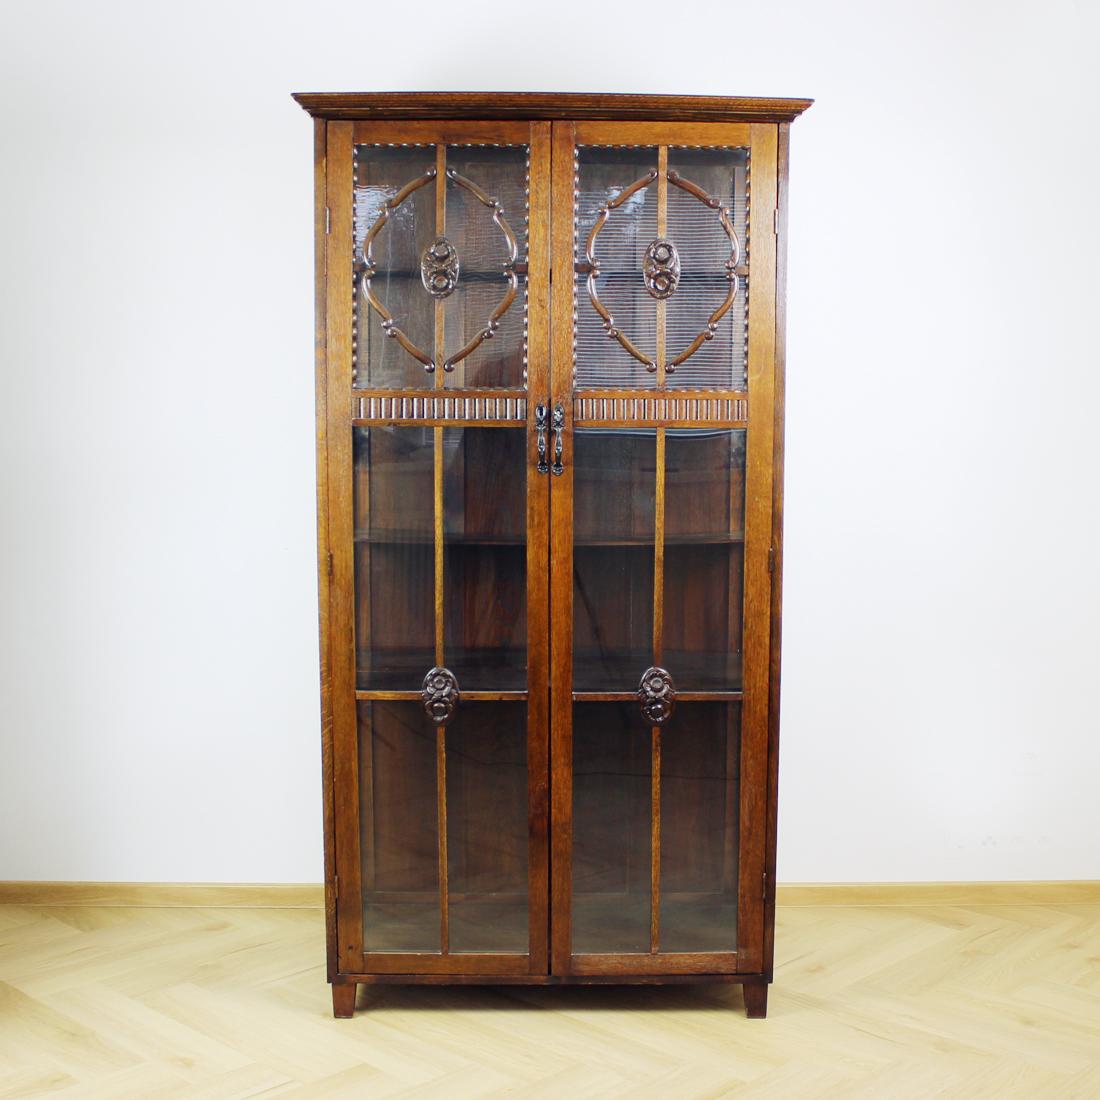 Beautiful and fully restored original art deco display cabinet. Trully a one of a kind item. The oak wood construction and ornaments all around the showcase show great deal of wood carpentry and detail work. The cabinet has two glass doors with